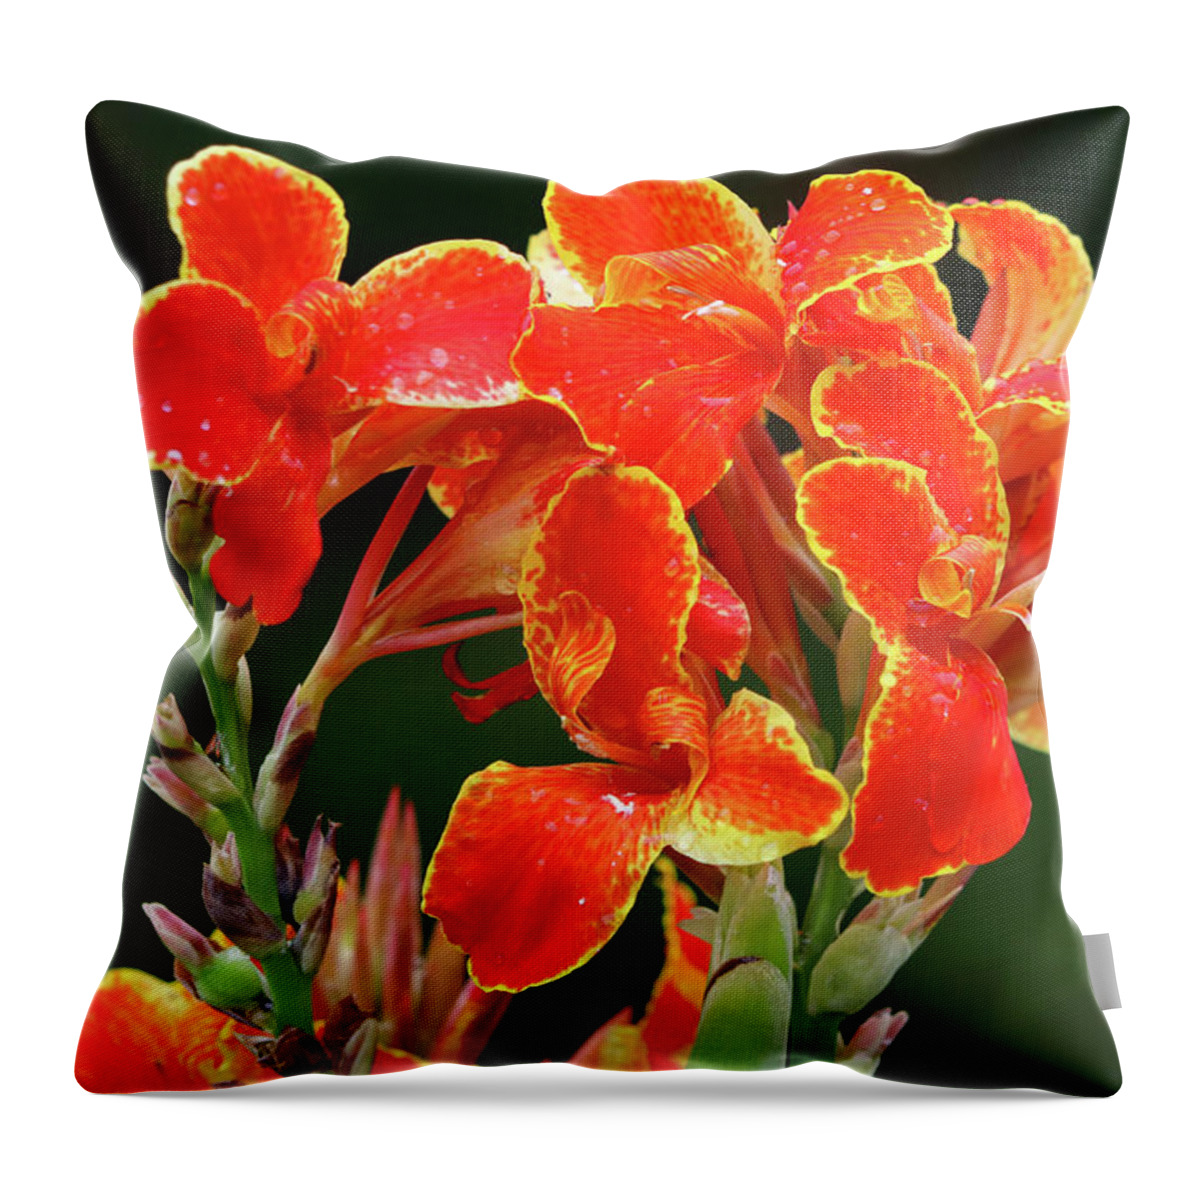 Flower Throw Pillow featuring the photograph Blooming Brightly by Mary Anne Delgado